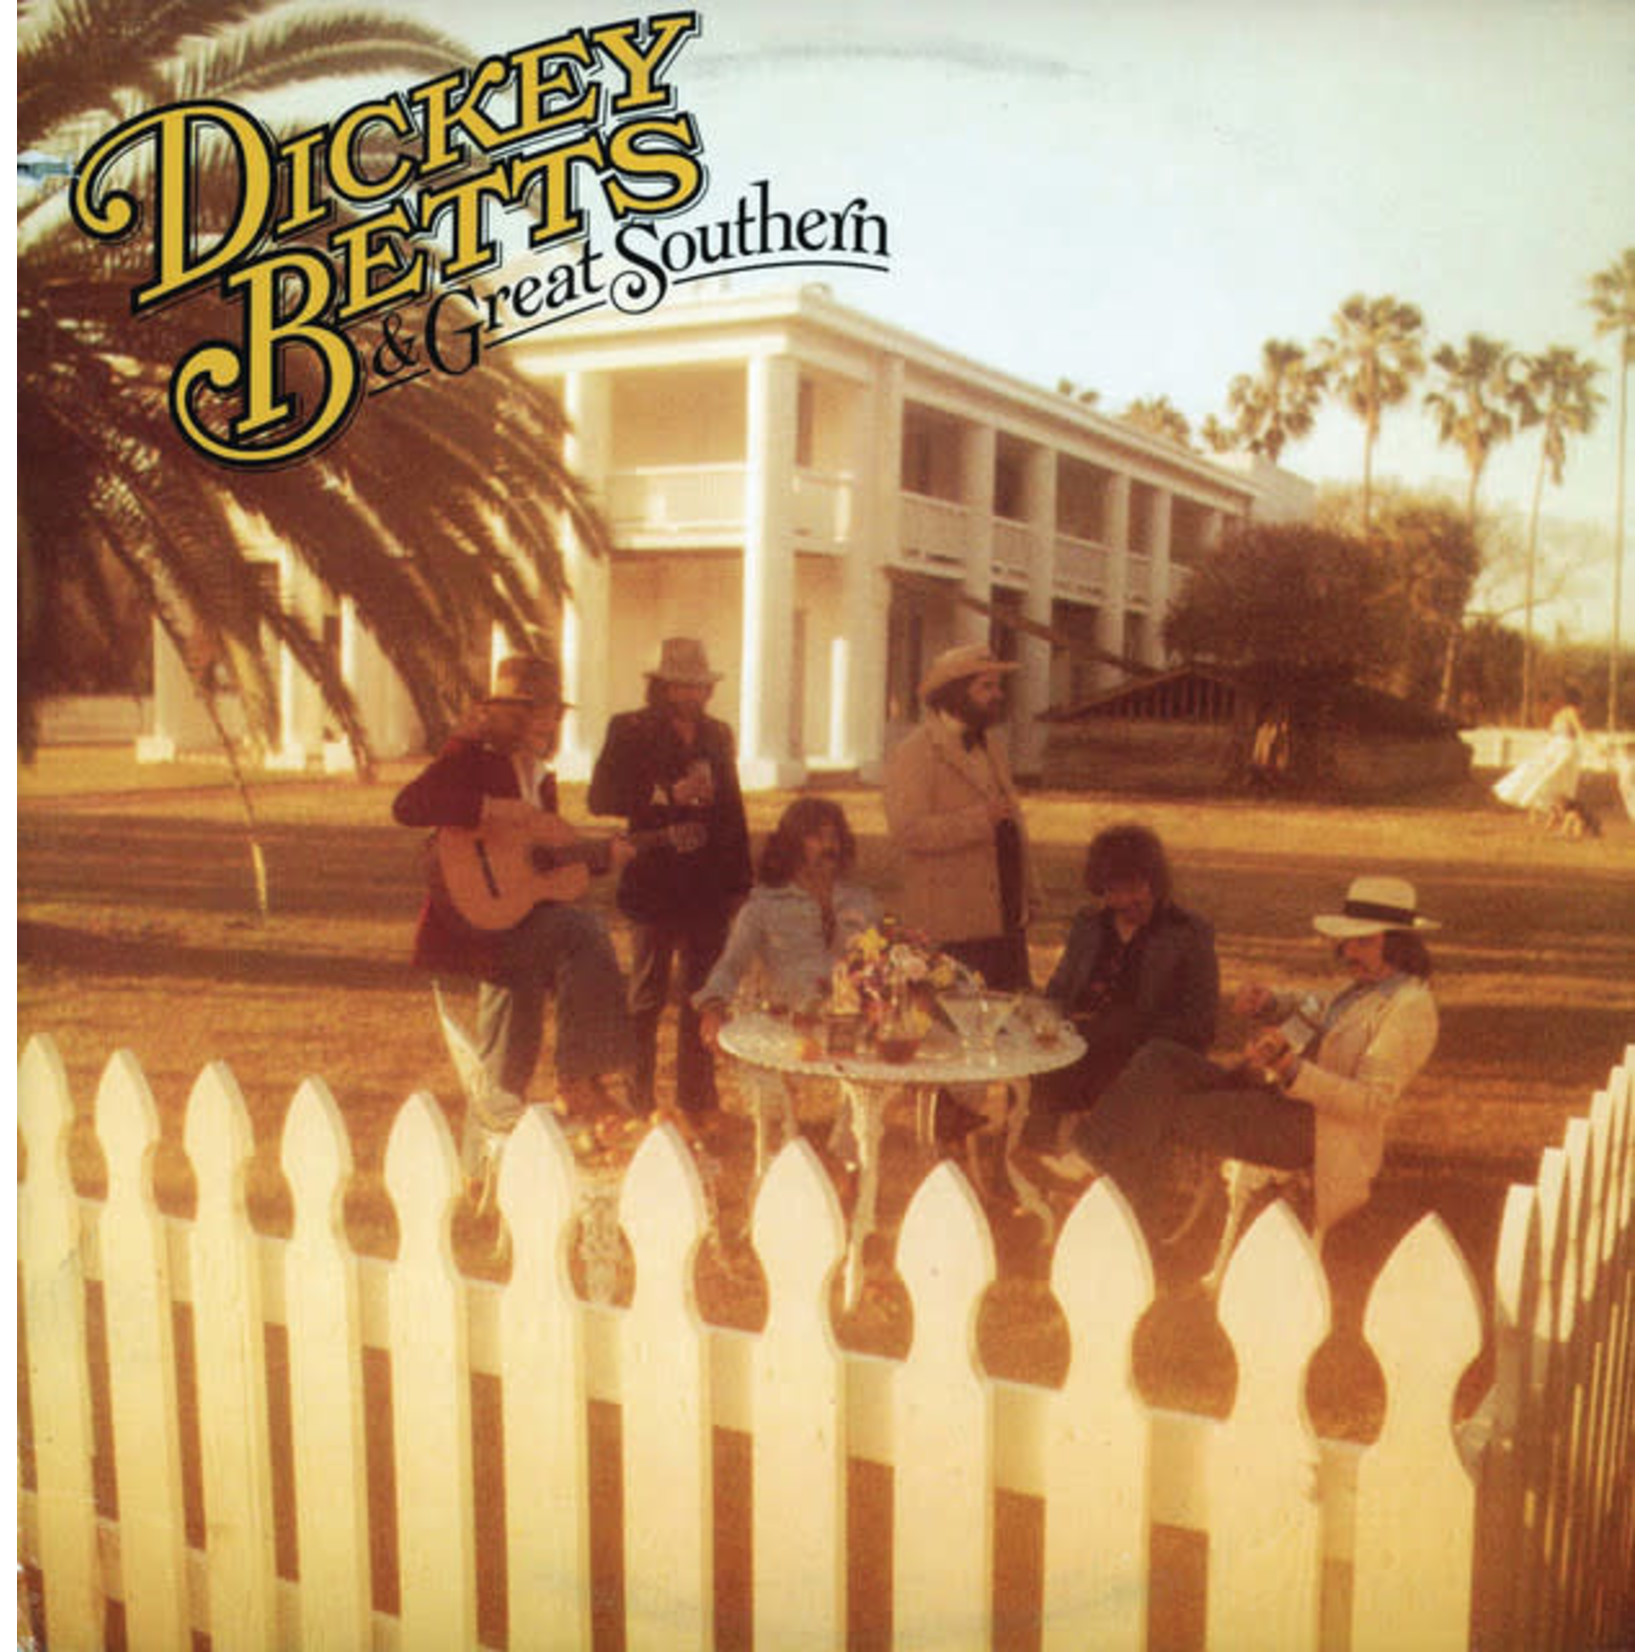 [Vintage] Dickey Betts - Dickey Betts & Great Southern